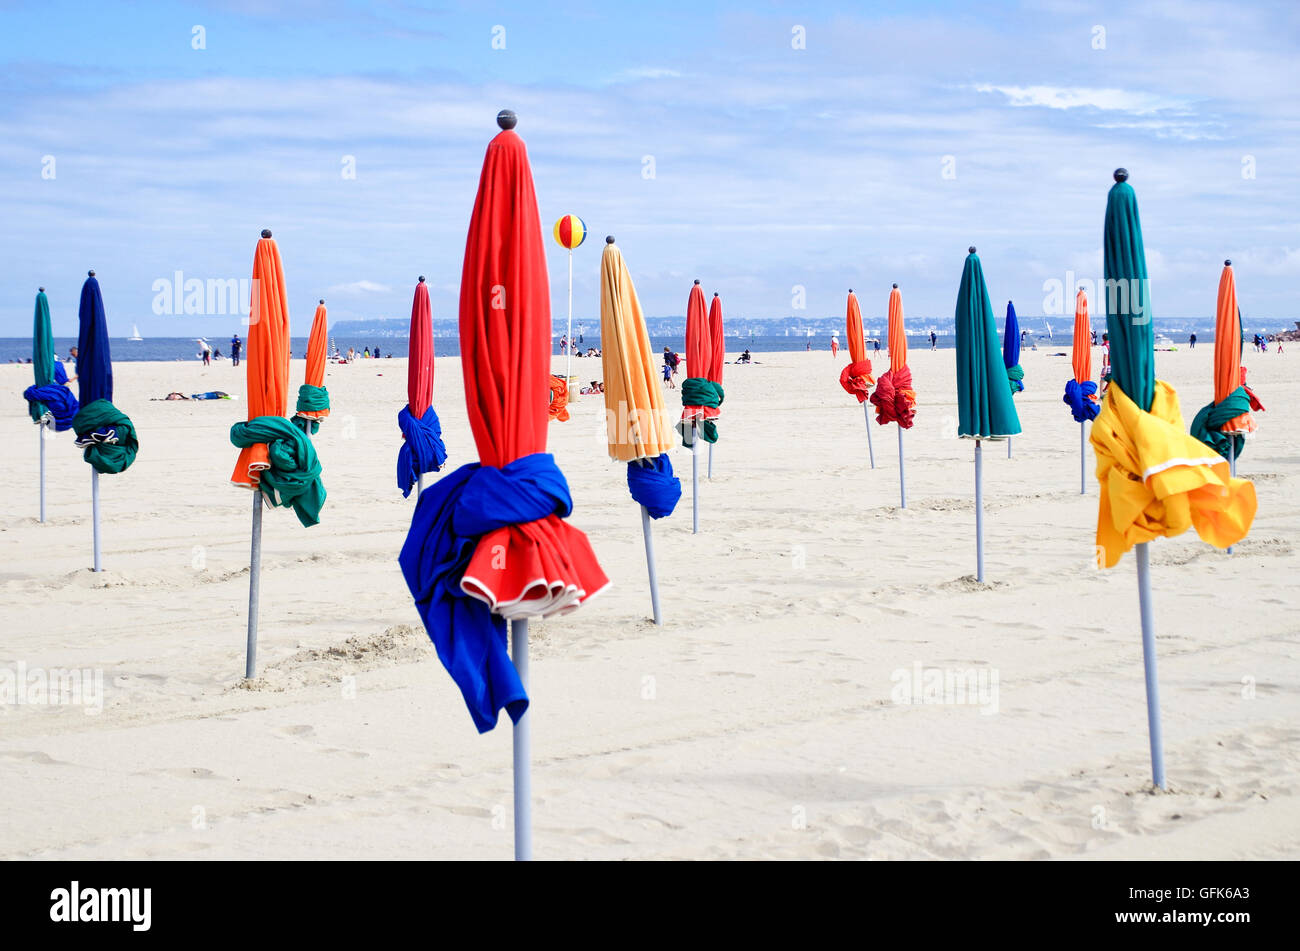 View of the plage de Deauville with its colourful beach umbrellas that can be turned into tents on this fine sandy beach Stock Photo